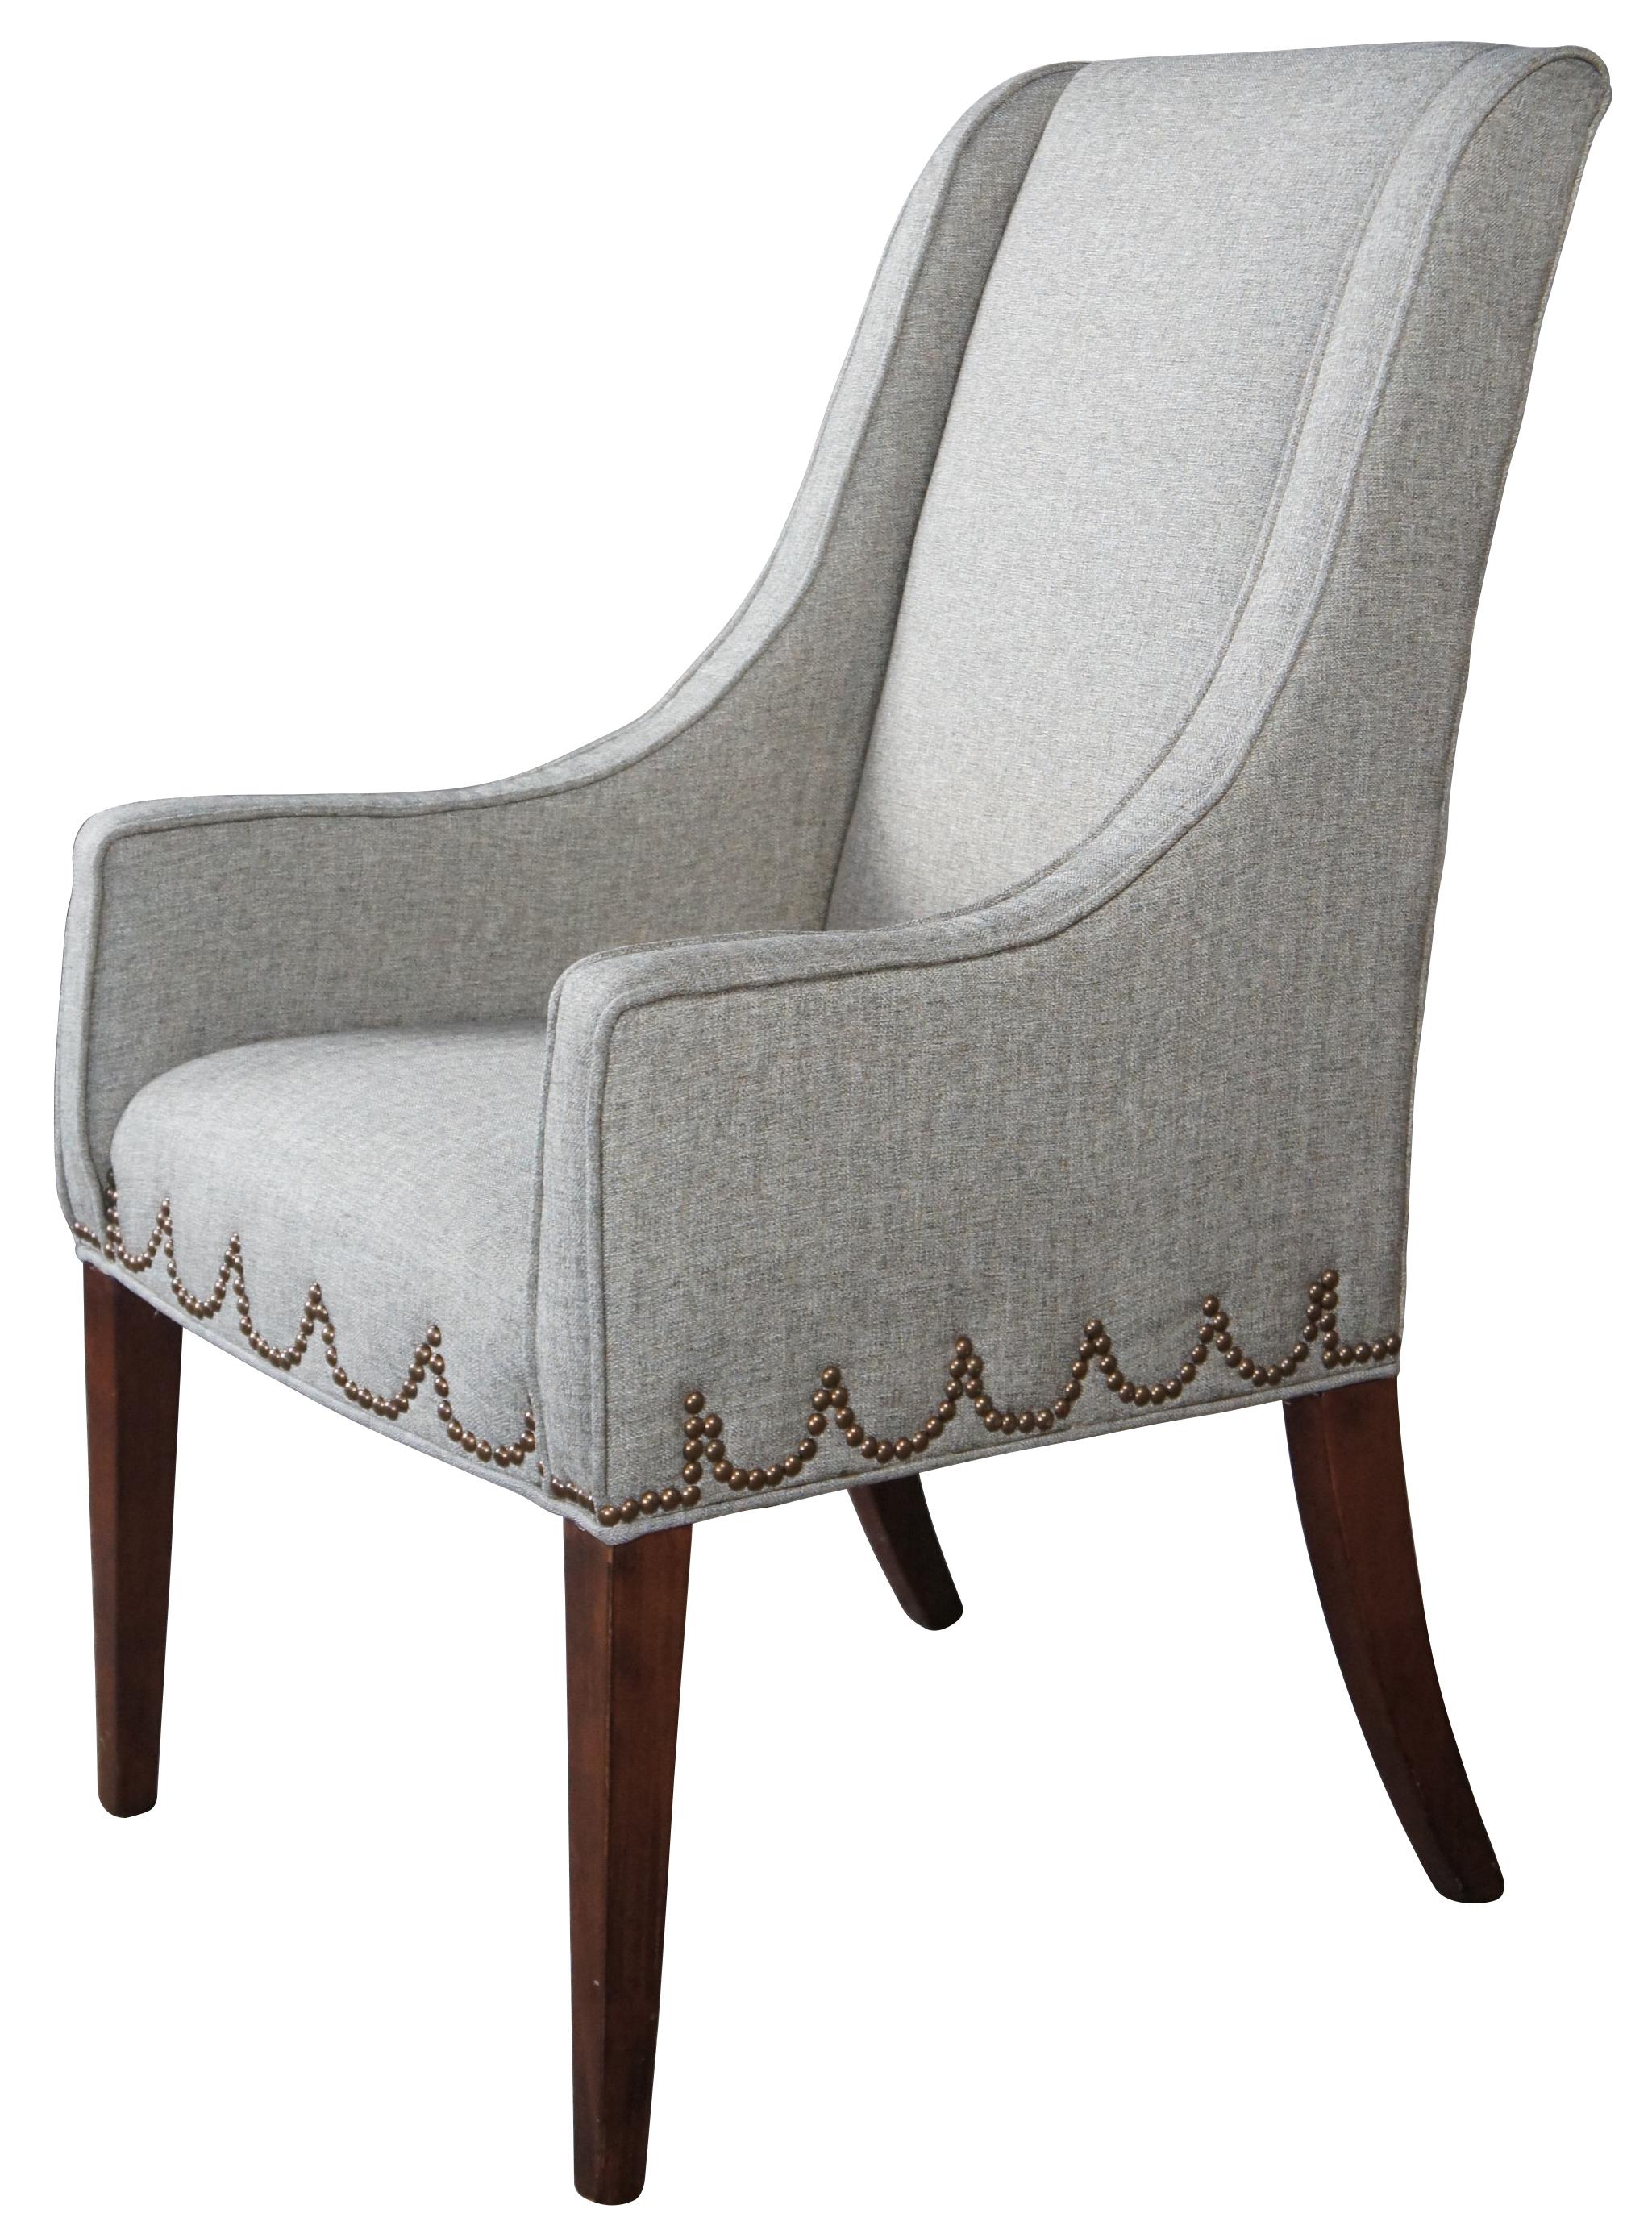 Universal furniture gray slipper arm chair. Graceful lines with Hepplewhite styling, nailhead trim and square tapered mahogany finished legs.
 